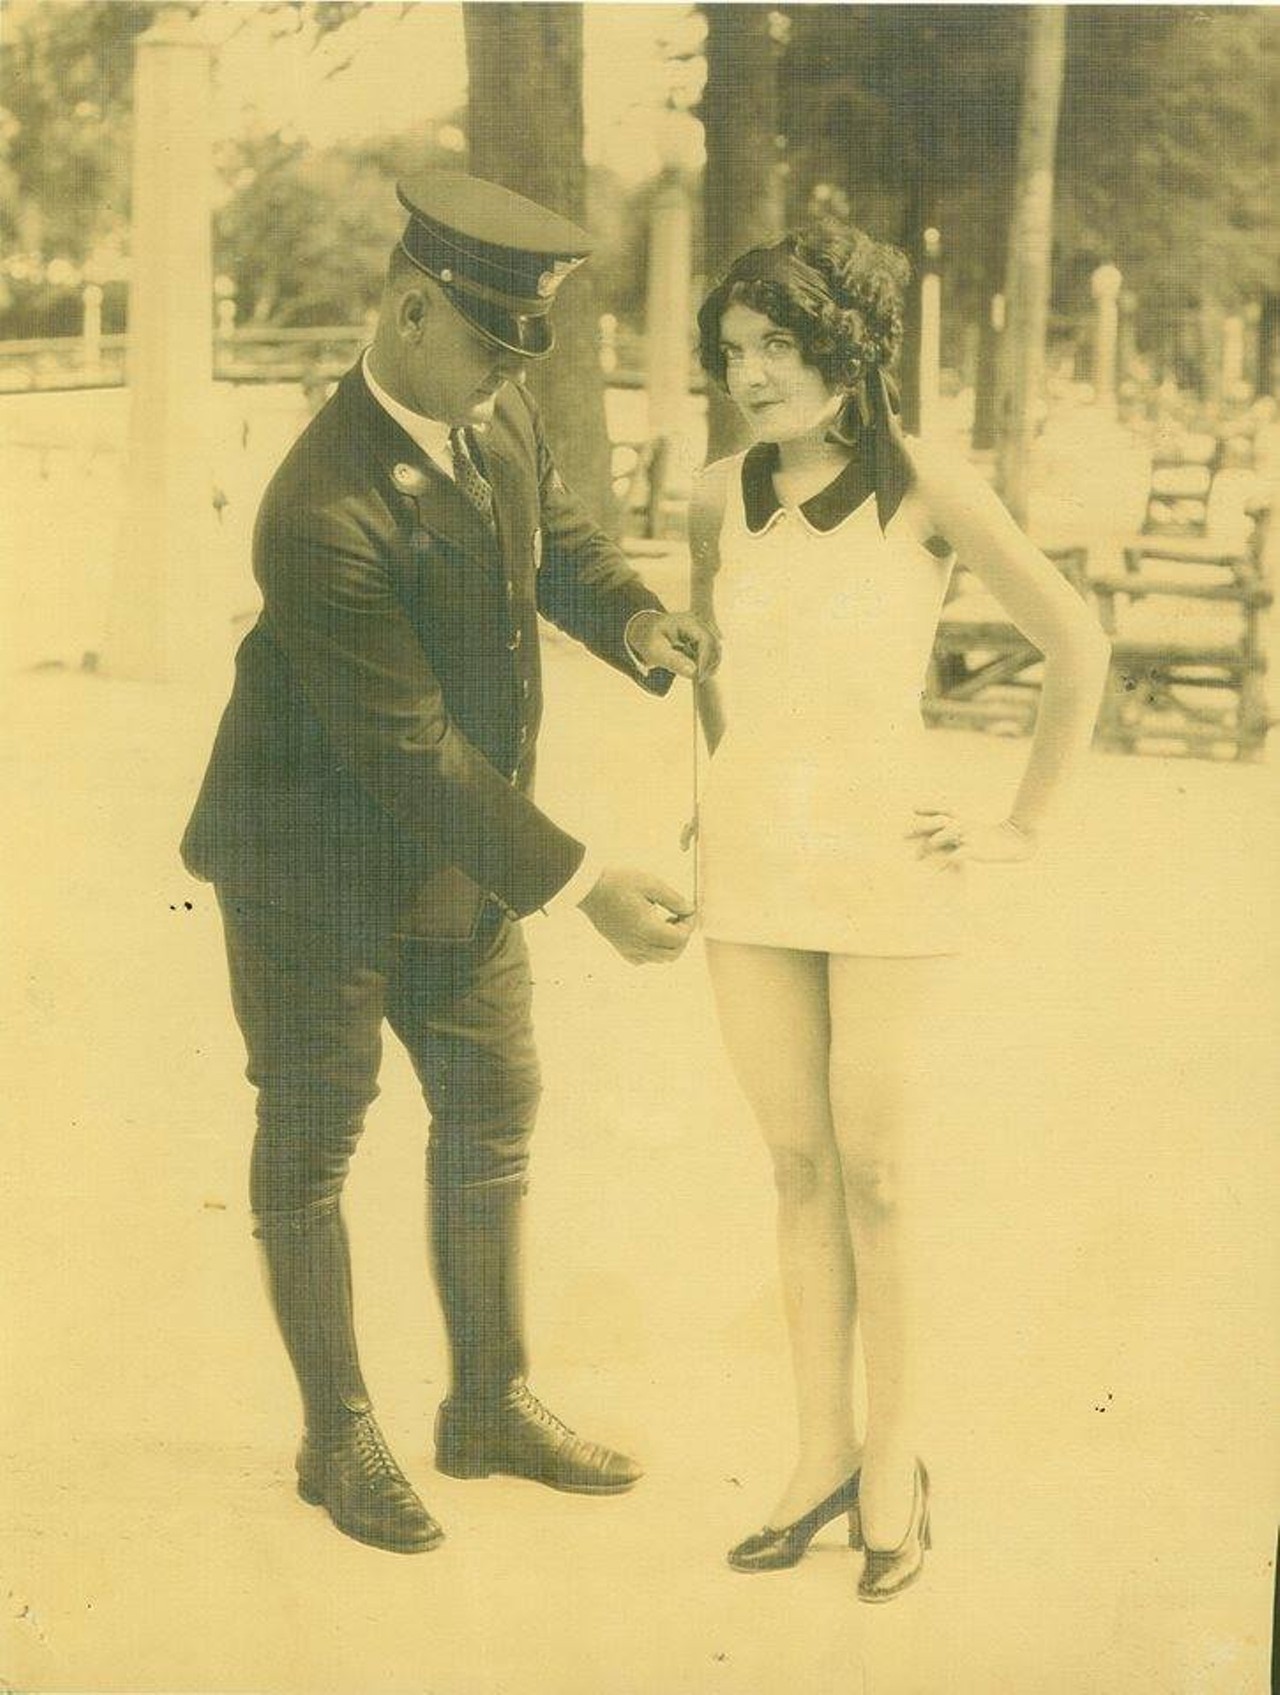 Policeman Measures Lady's Swimsuit at San Pedro Springs Pool
An SAPD officer measures Miss San Antonio 1927's bathing suit to see if it's in accordance with city ordinance. What a square. 
Vintage San Antonio